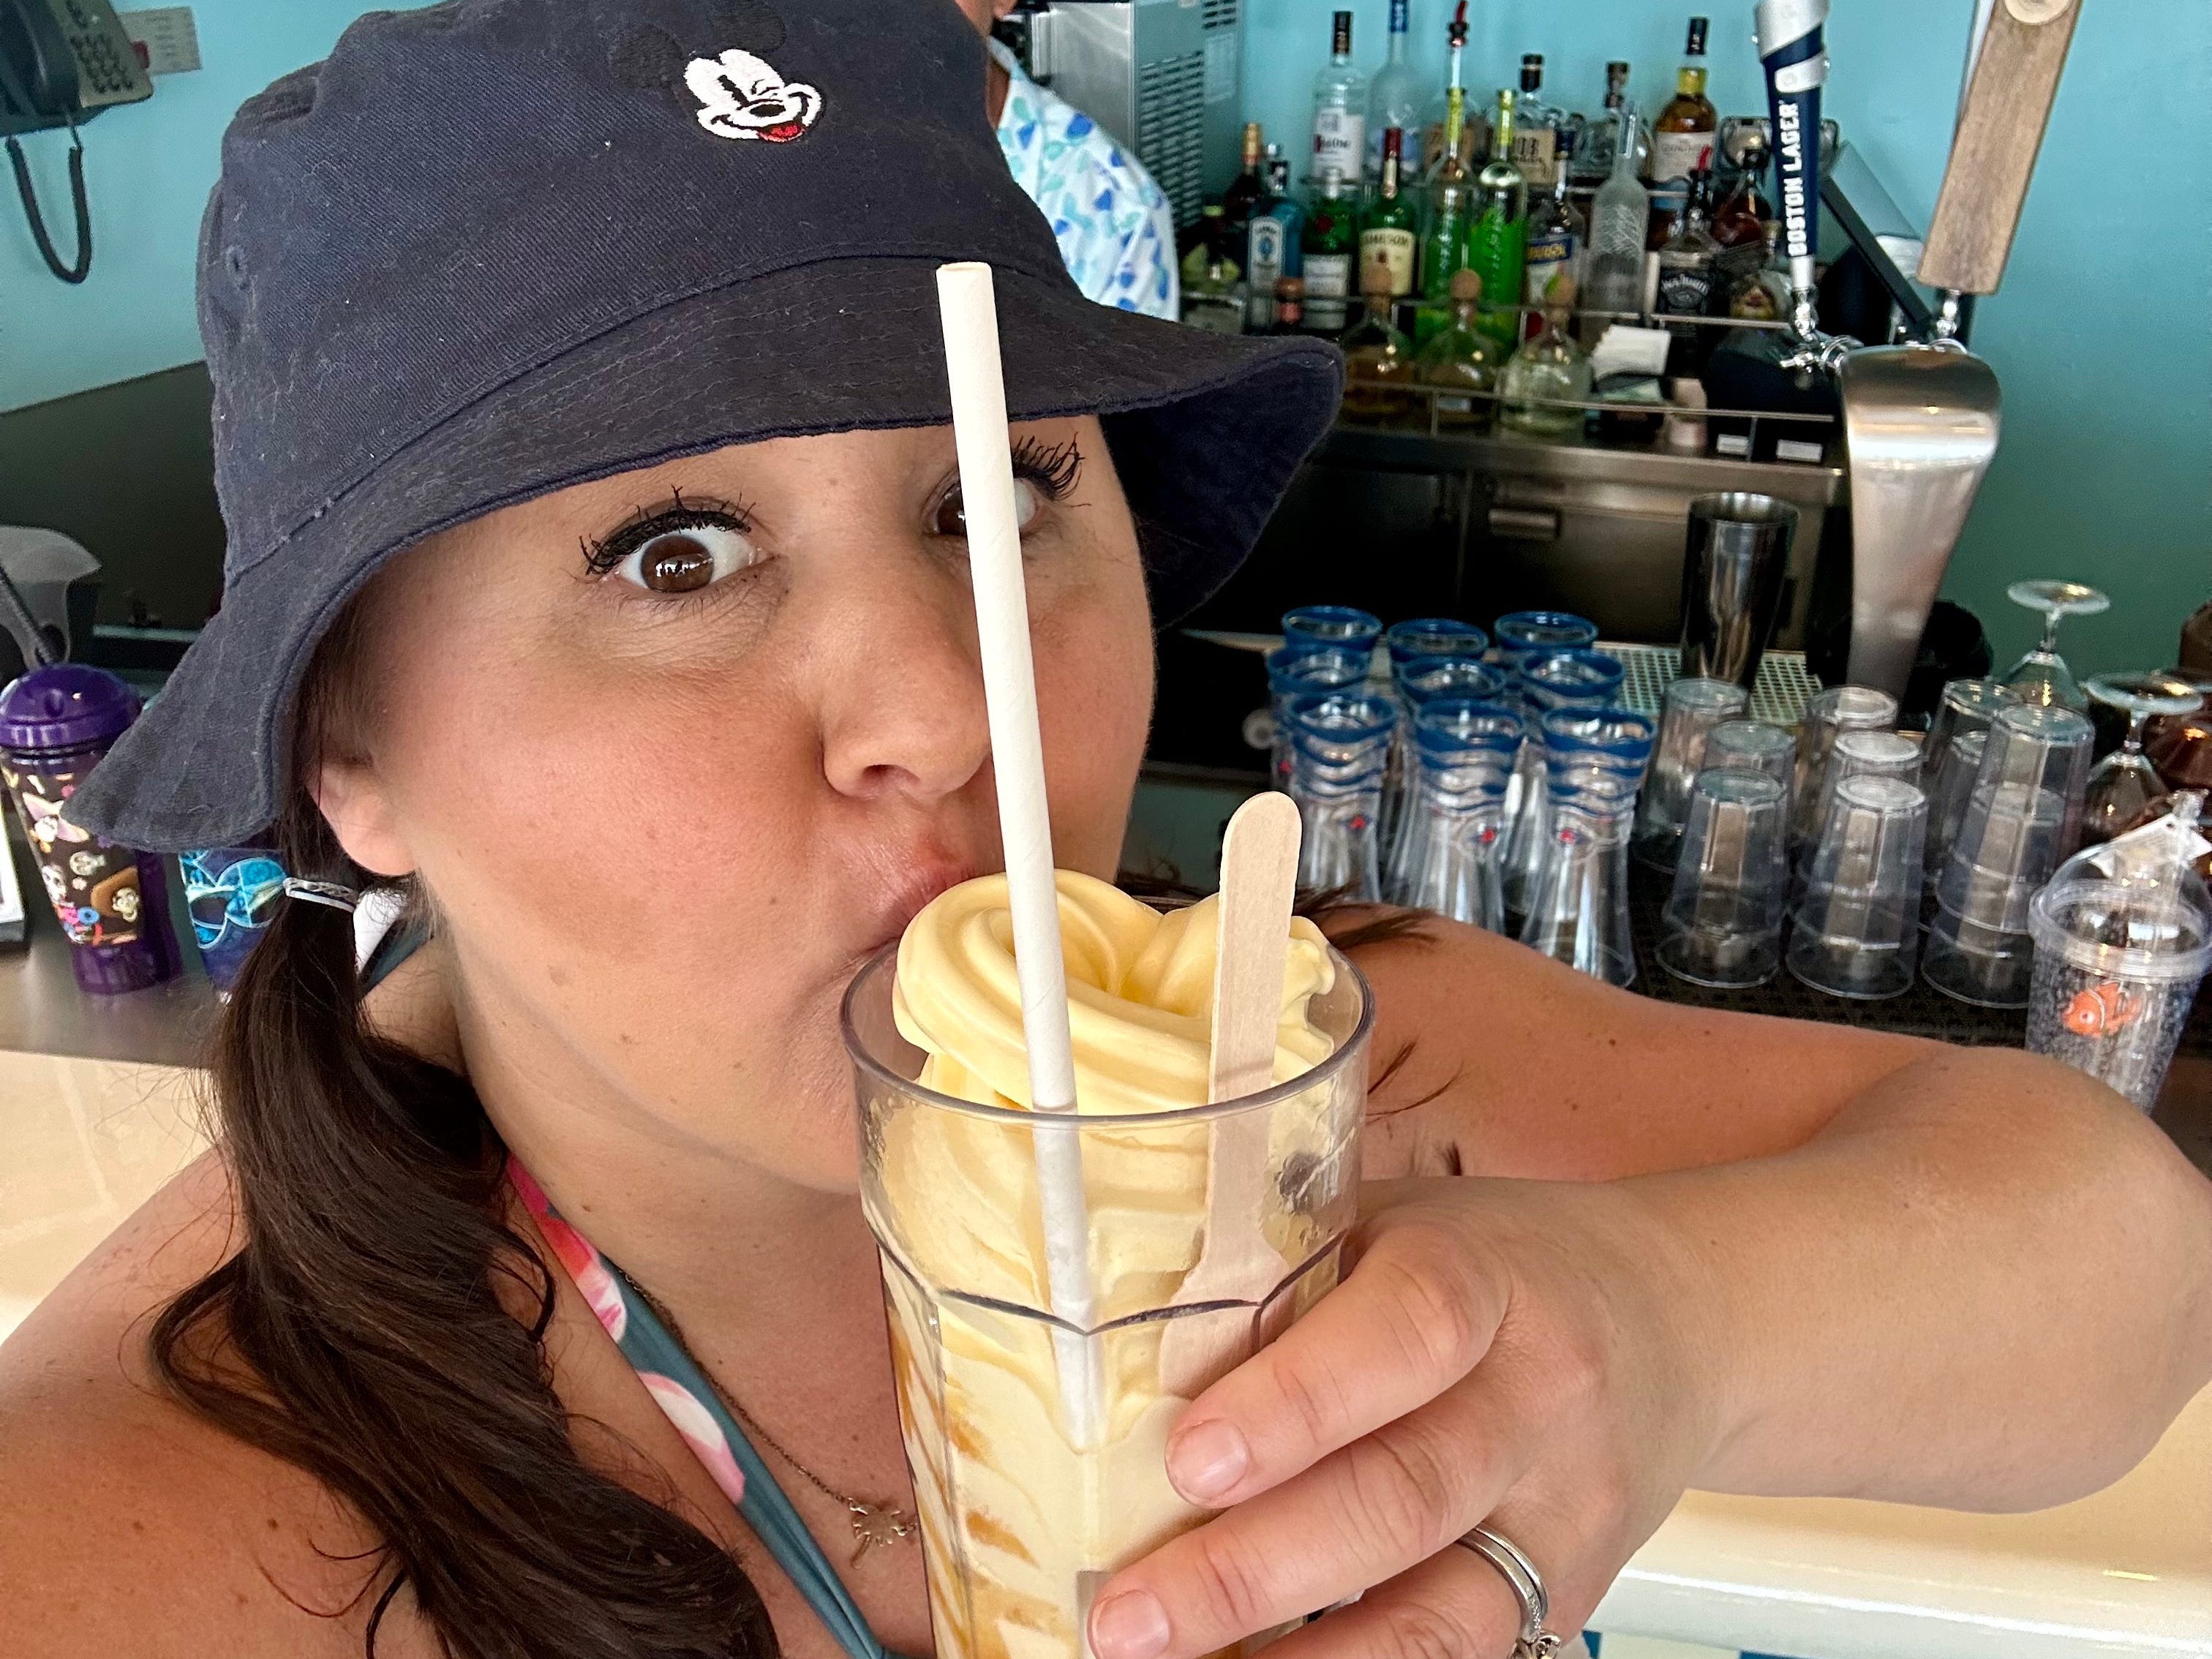 <p>While Disney doesn't offer a drink package that includes cocktails, the well-themed bars are worth the splurge. </p><p>From a <a href="https://www.businessinsider.com/star-wars-lounge-disney-wish-cruise-worth-it-review-photos-2022-7">Star Wars-themed watering hole</a> to a Peter Pan-themed speakeasy, I really enjoy the inventive cocktail programs and immersive settings. Each bar also has its own unique themed drinks, which keeps things exciting.</p><p>As a regular at Disney World, I was also surprised to find that drinks are much more affordable on a Disney Cruise, with prices consistent across the ships I've been on. </p><p>For example, my favorite Dole Whip spiked with rum was $9 on board, compared to the exact same version priced at $14 at <a href="https://www.businessinsider.com/best-and-worst-food-disney-world-this-year-2023">Disney World</a>.</p>